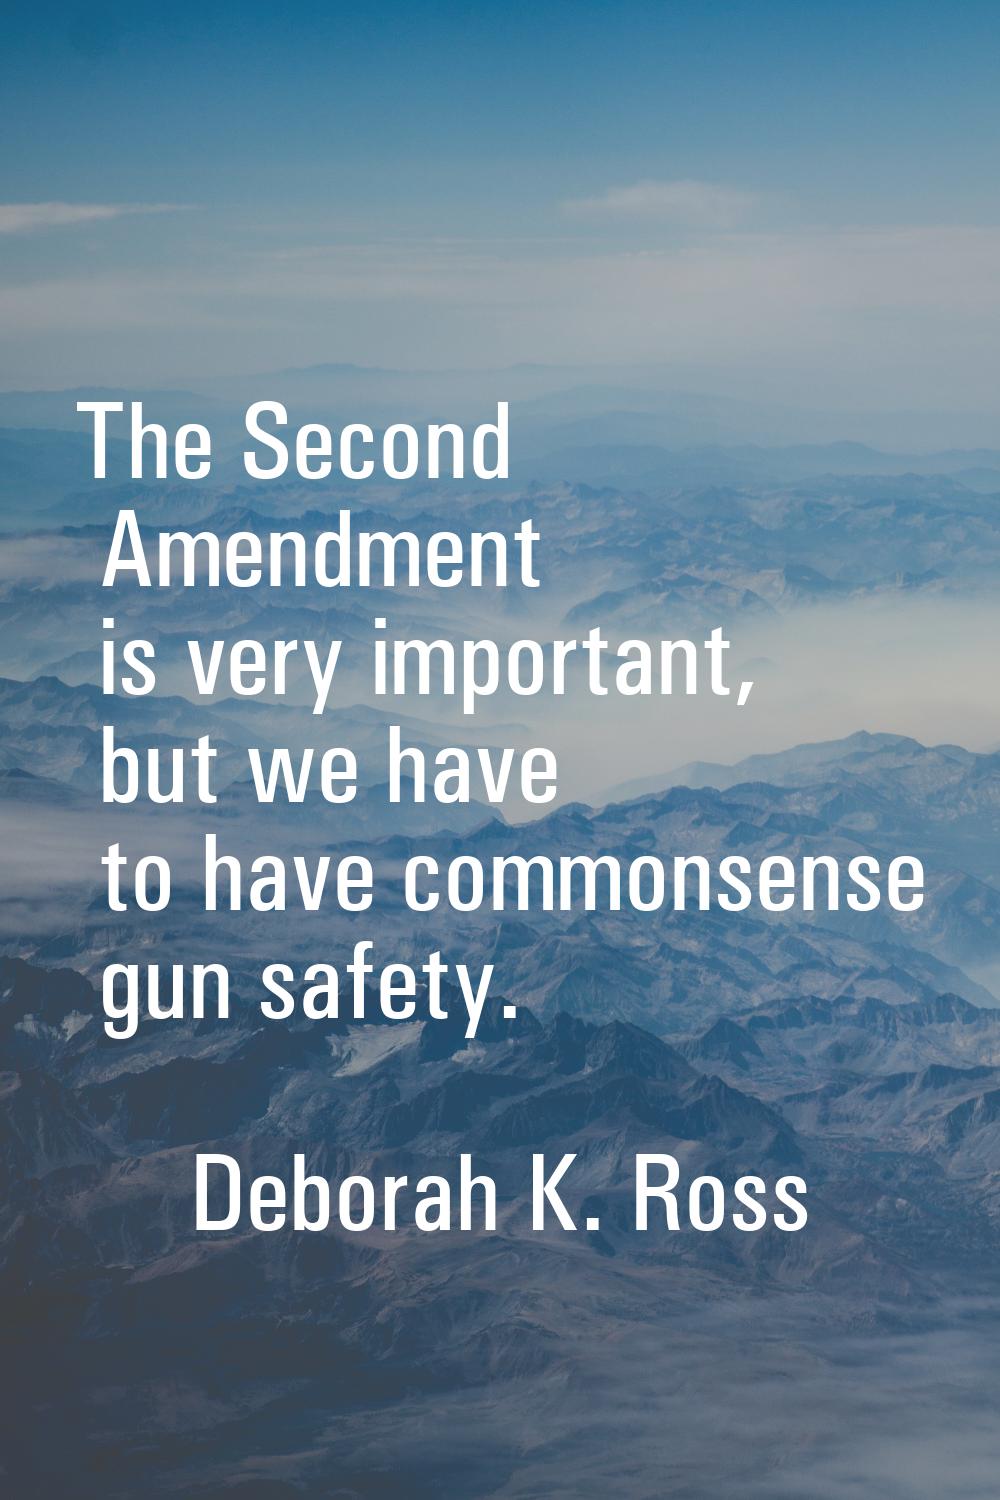 The Second Amendment is very important, but we have to have commonsense gun safety.